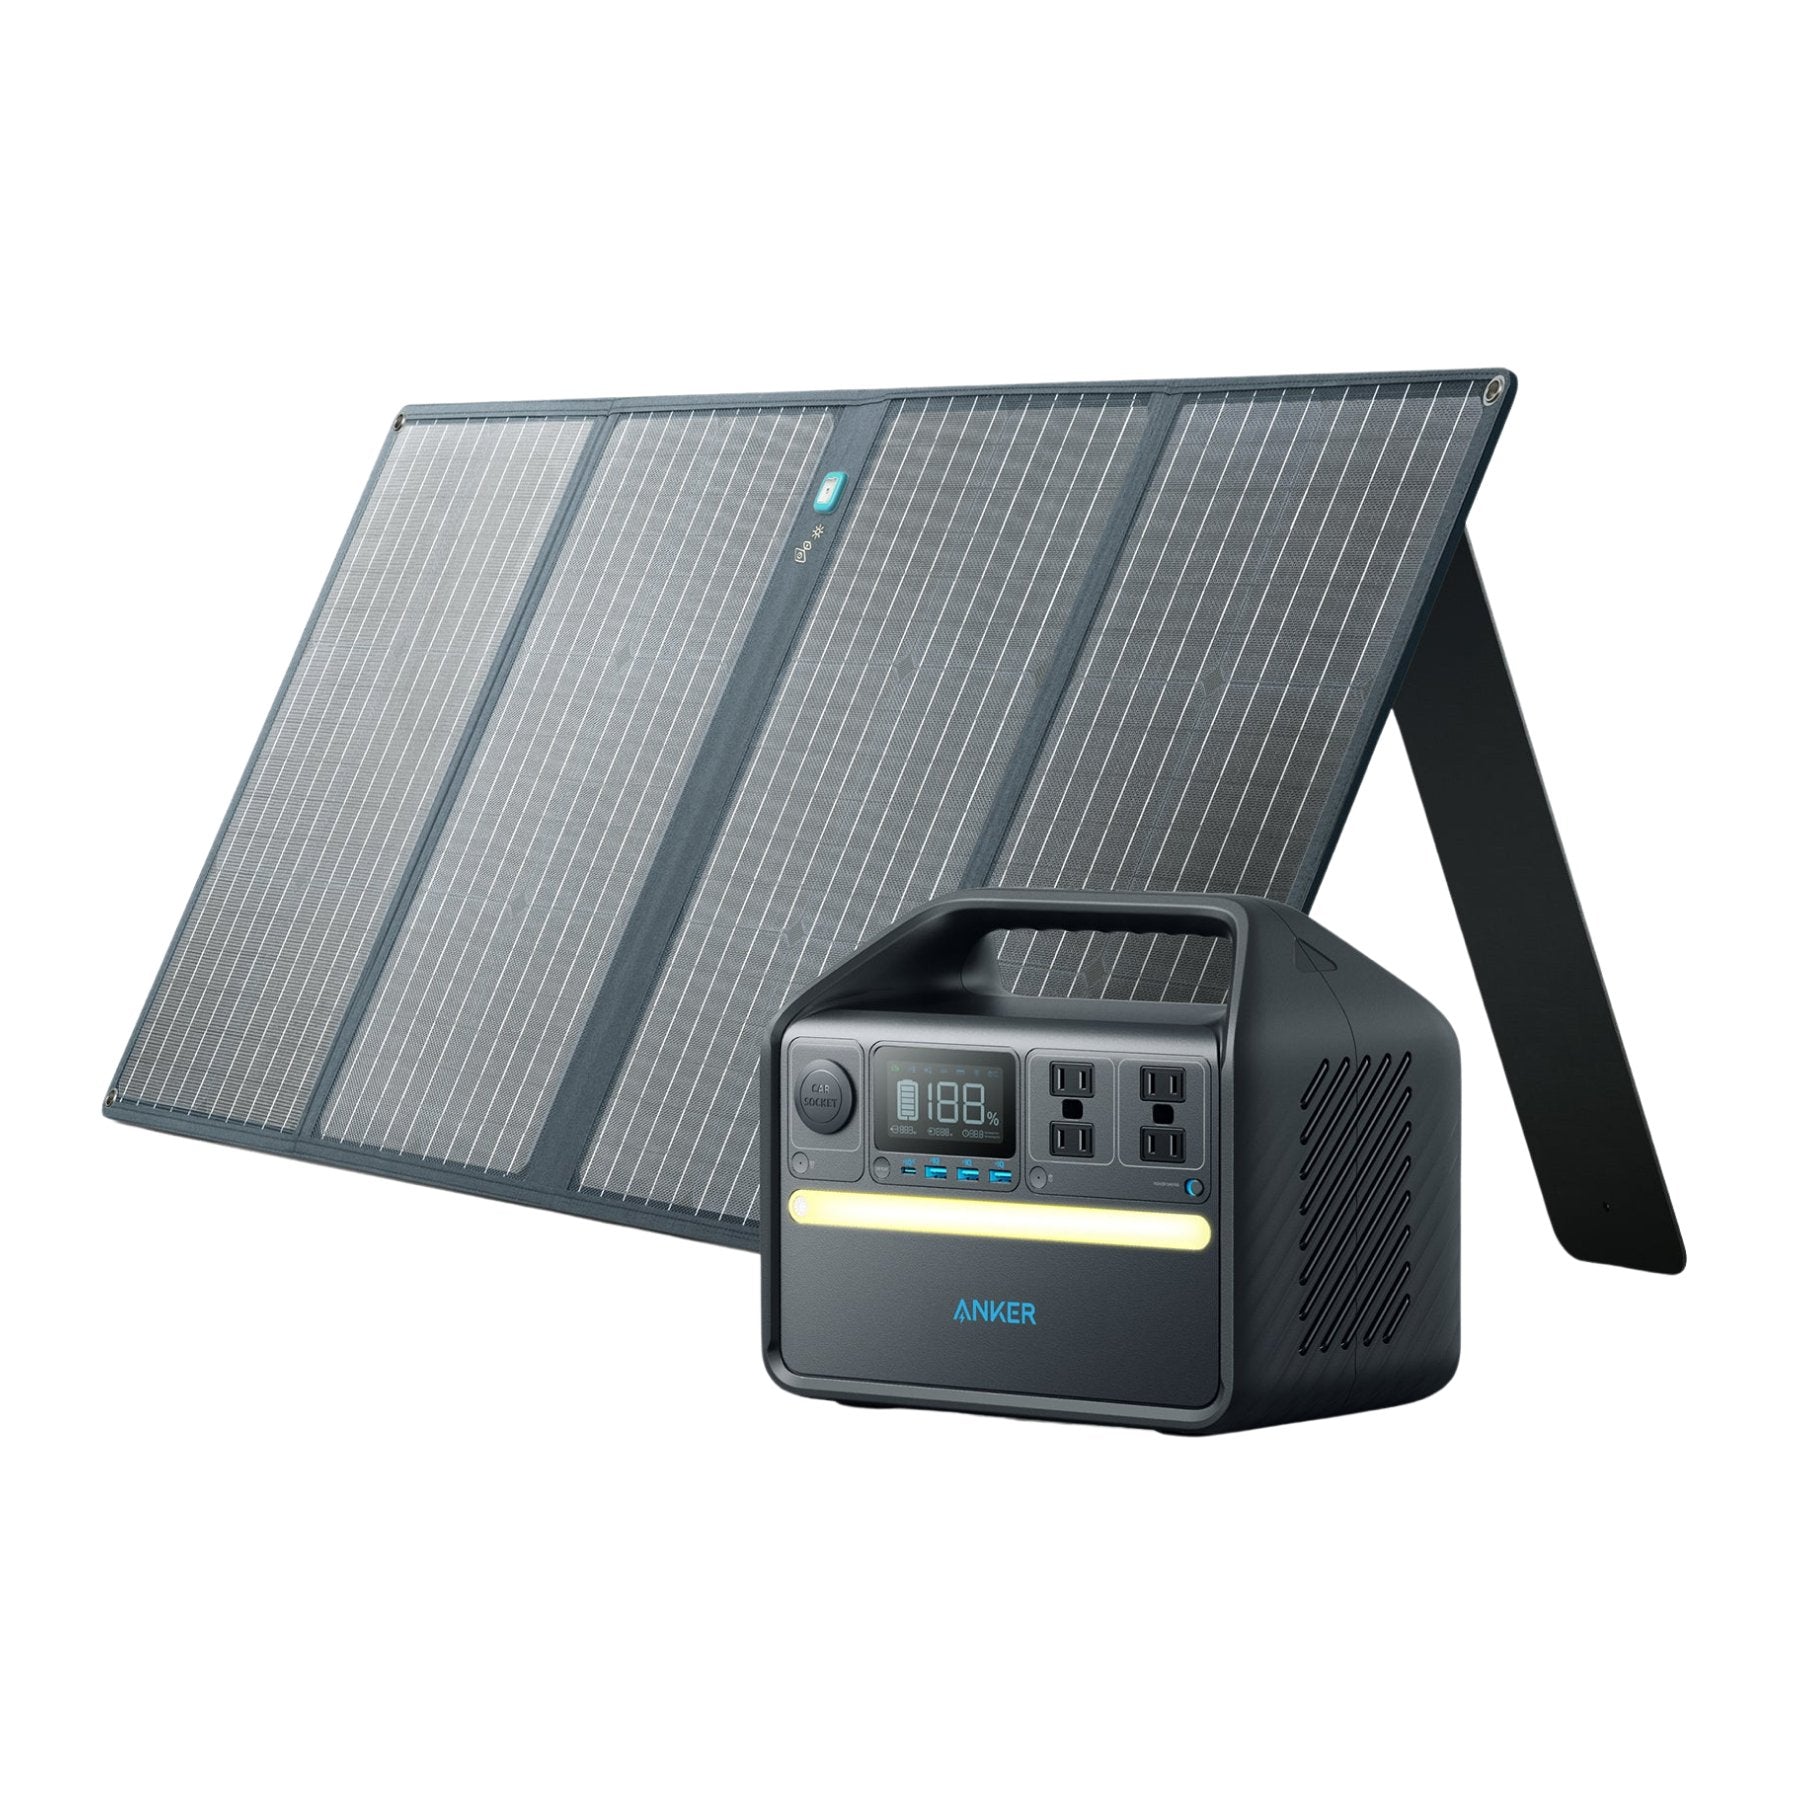 Anker 535 Solar Generator (PowerHouse 512Wh with 100W Solar Panel) - Solar Generators and Power Stations Plus